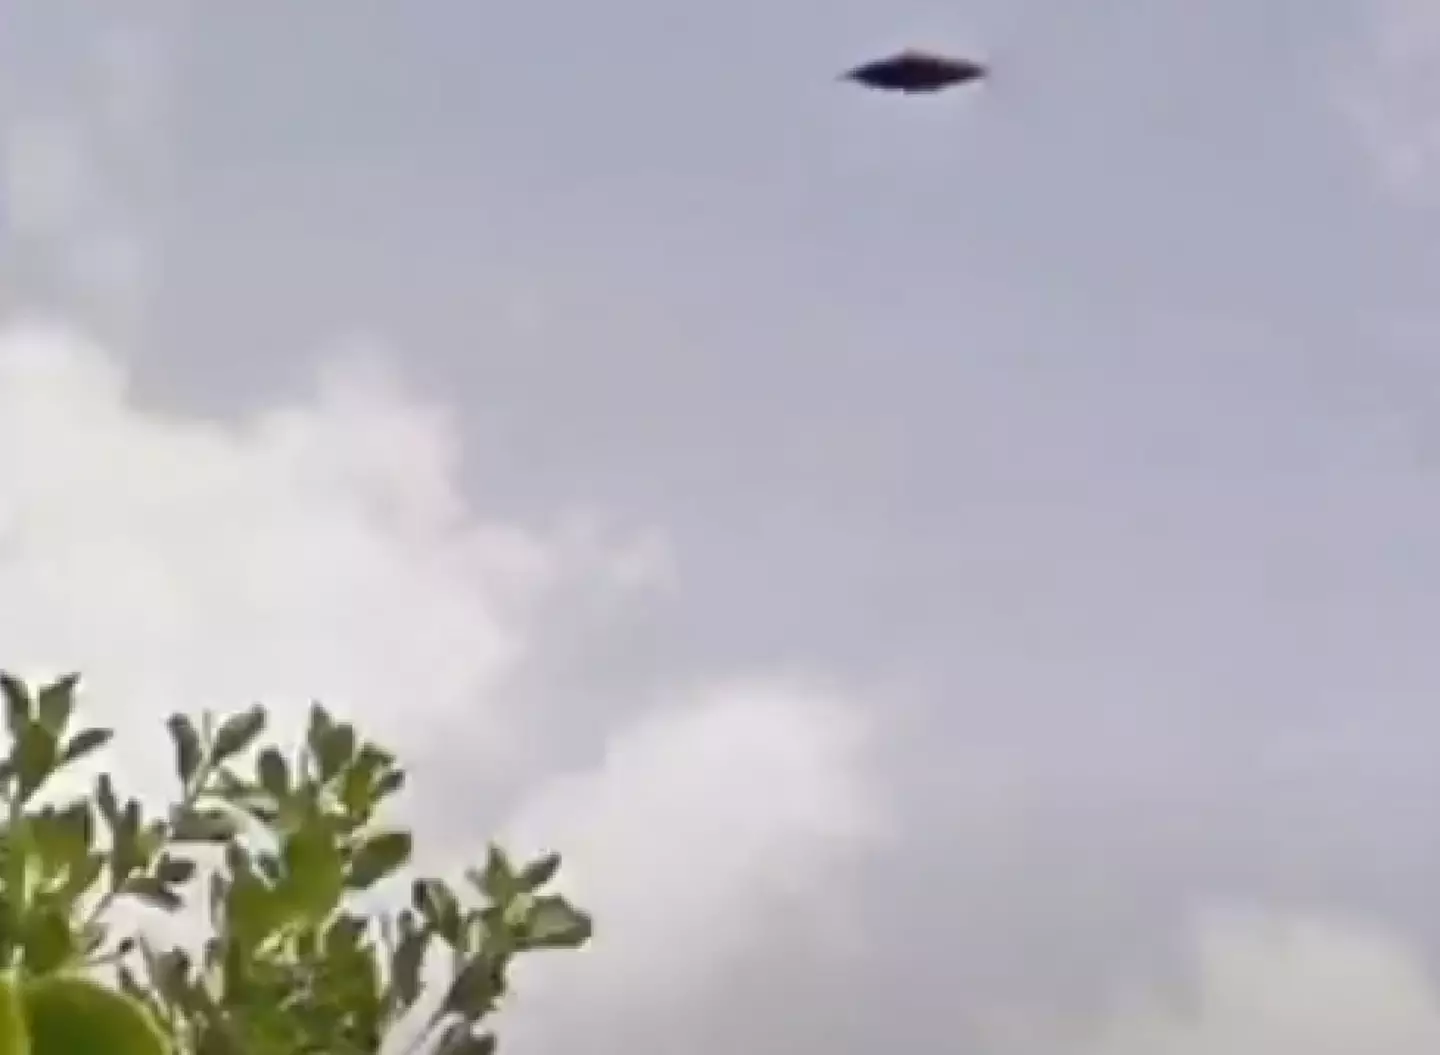 People thought Google Maps had revealed a UFO.